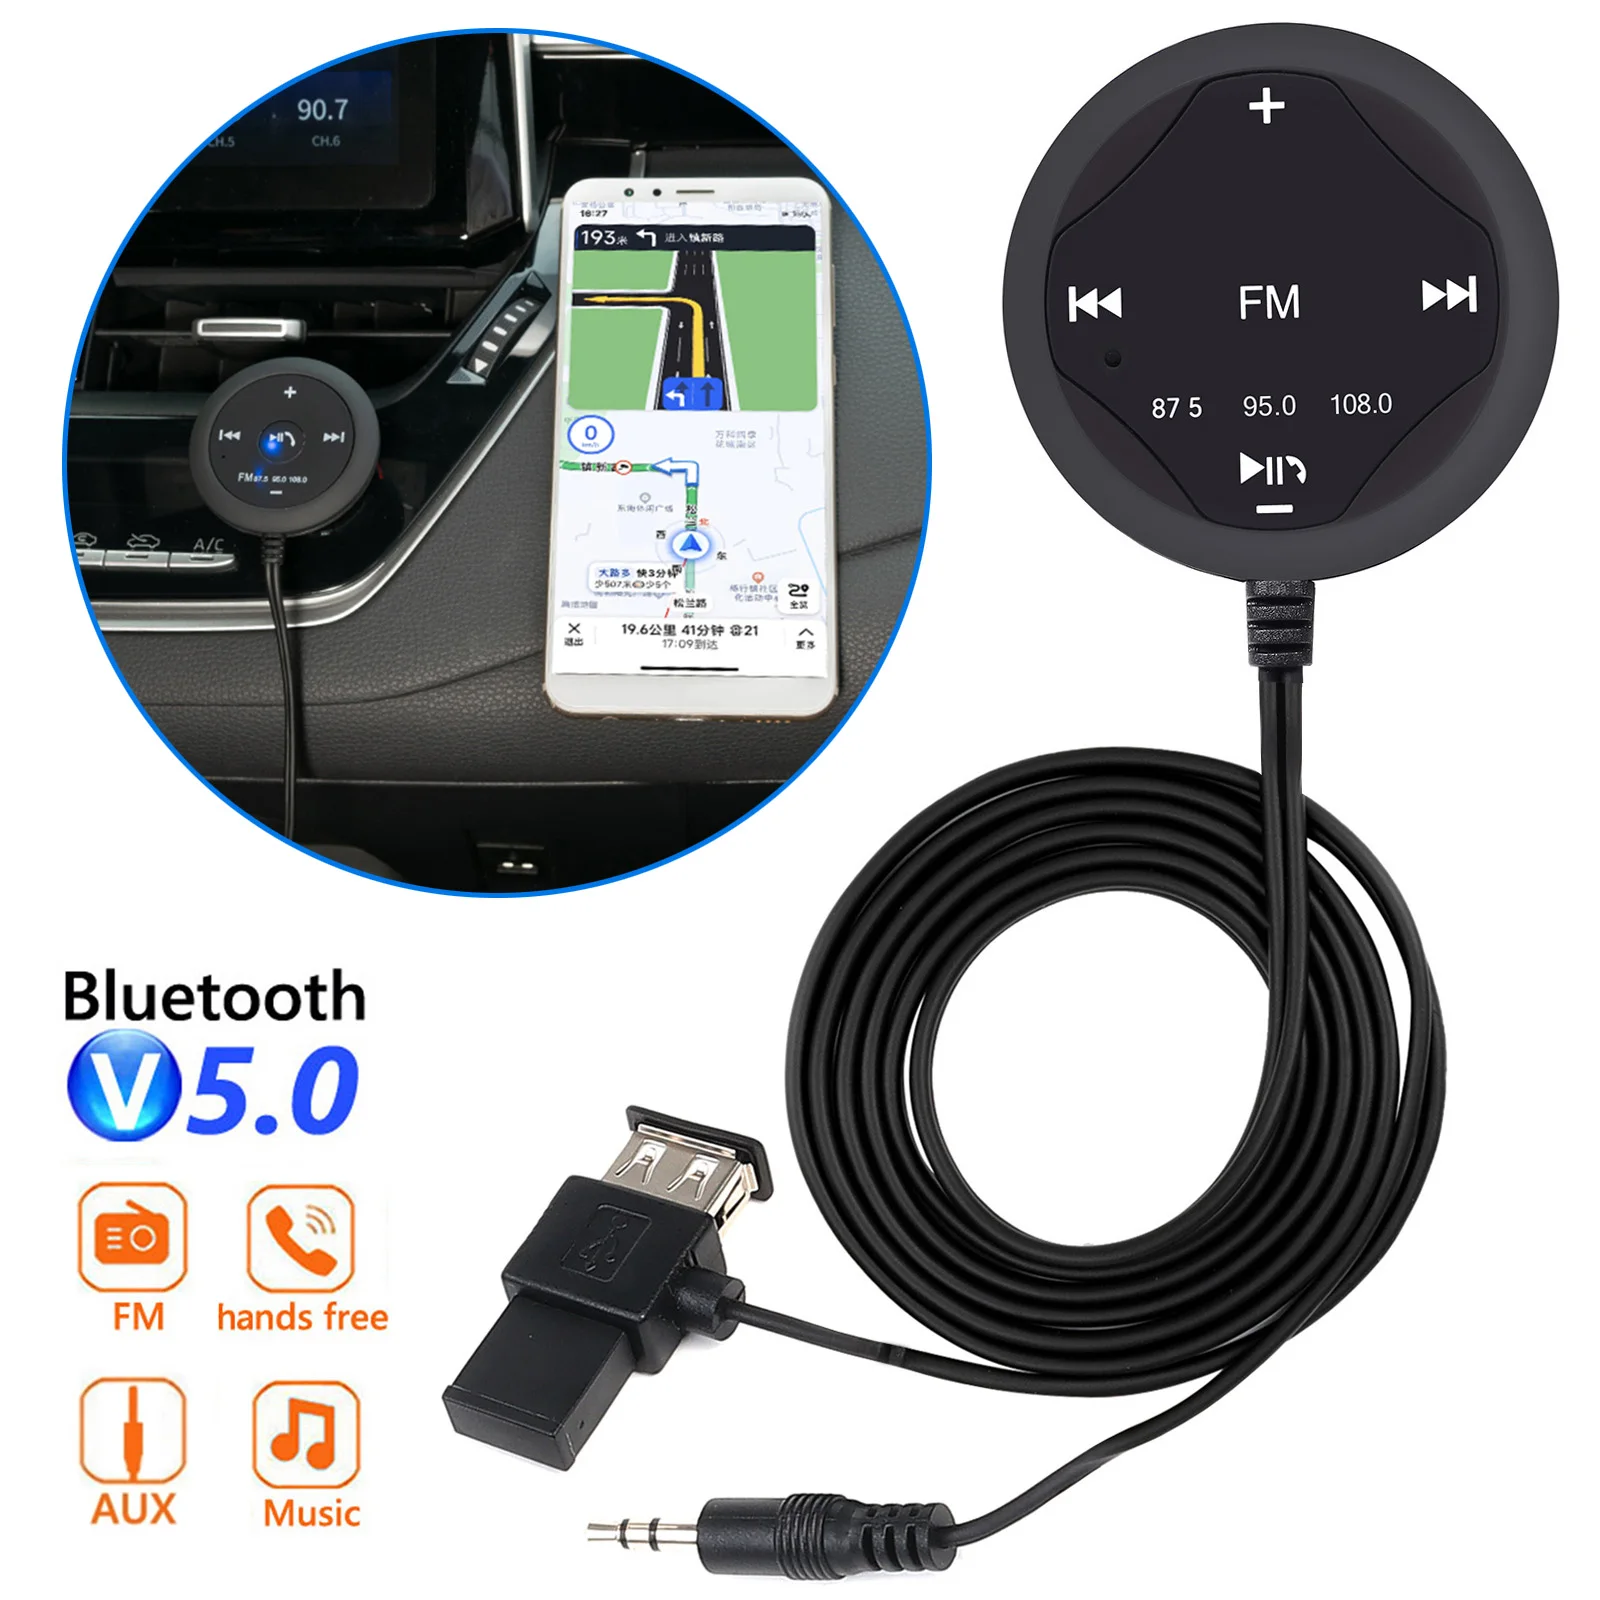 Hands-free Car Bluetooth compaitable 5.0 BT TO FM Transmitter AUX Kit MP3 Player Audio Receiver Stereo Adapter Accessories